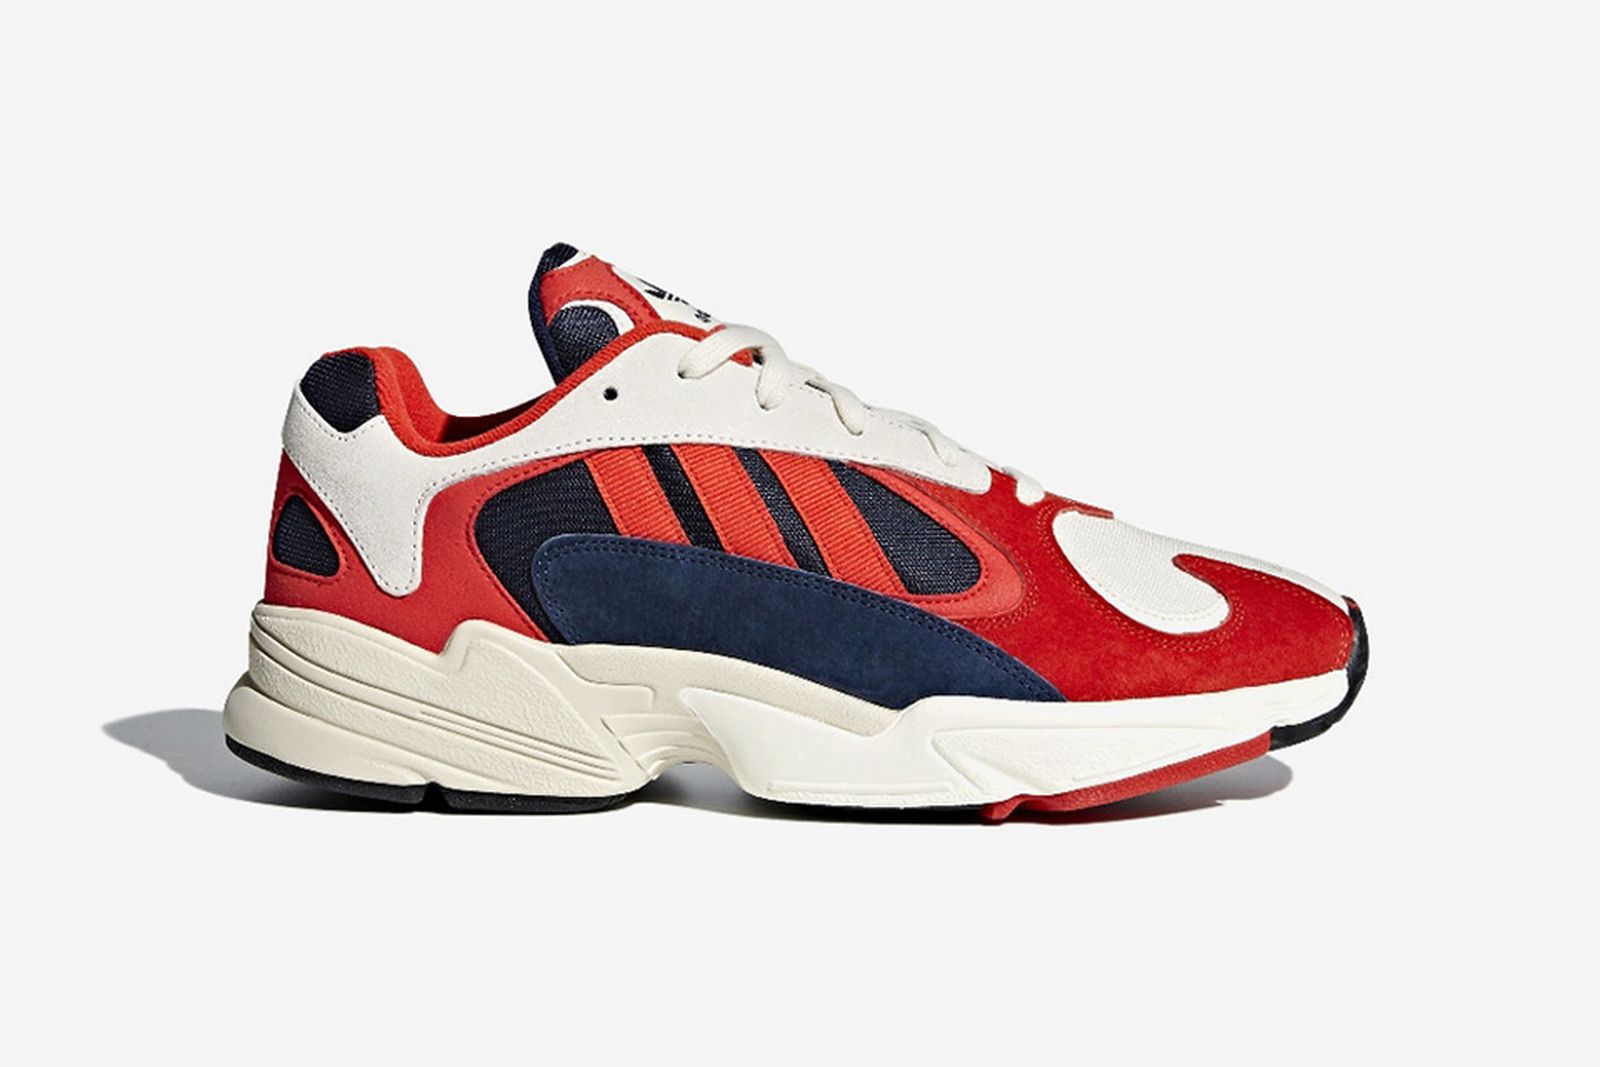 The New adidas Yung 1 Colorway Is Swag